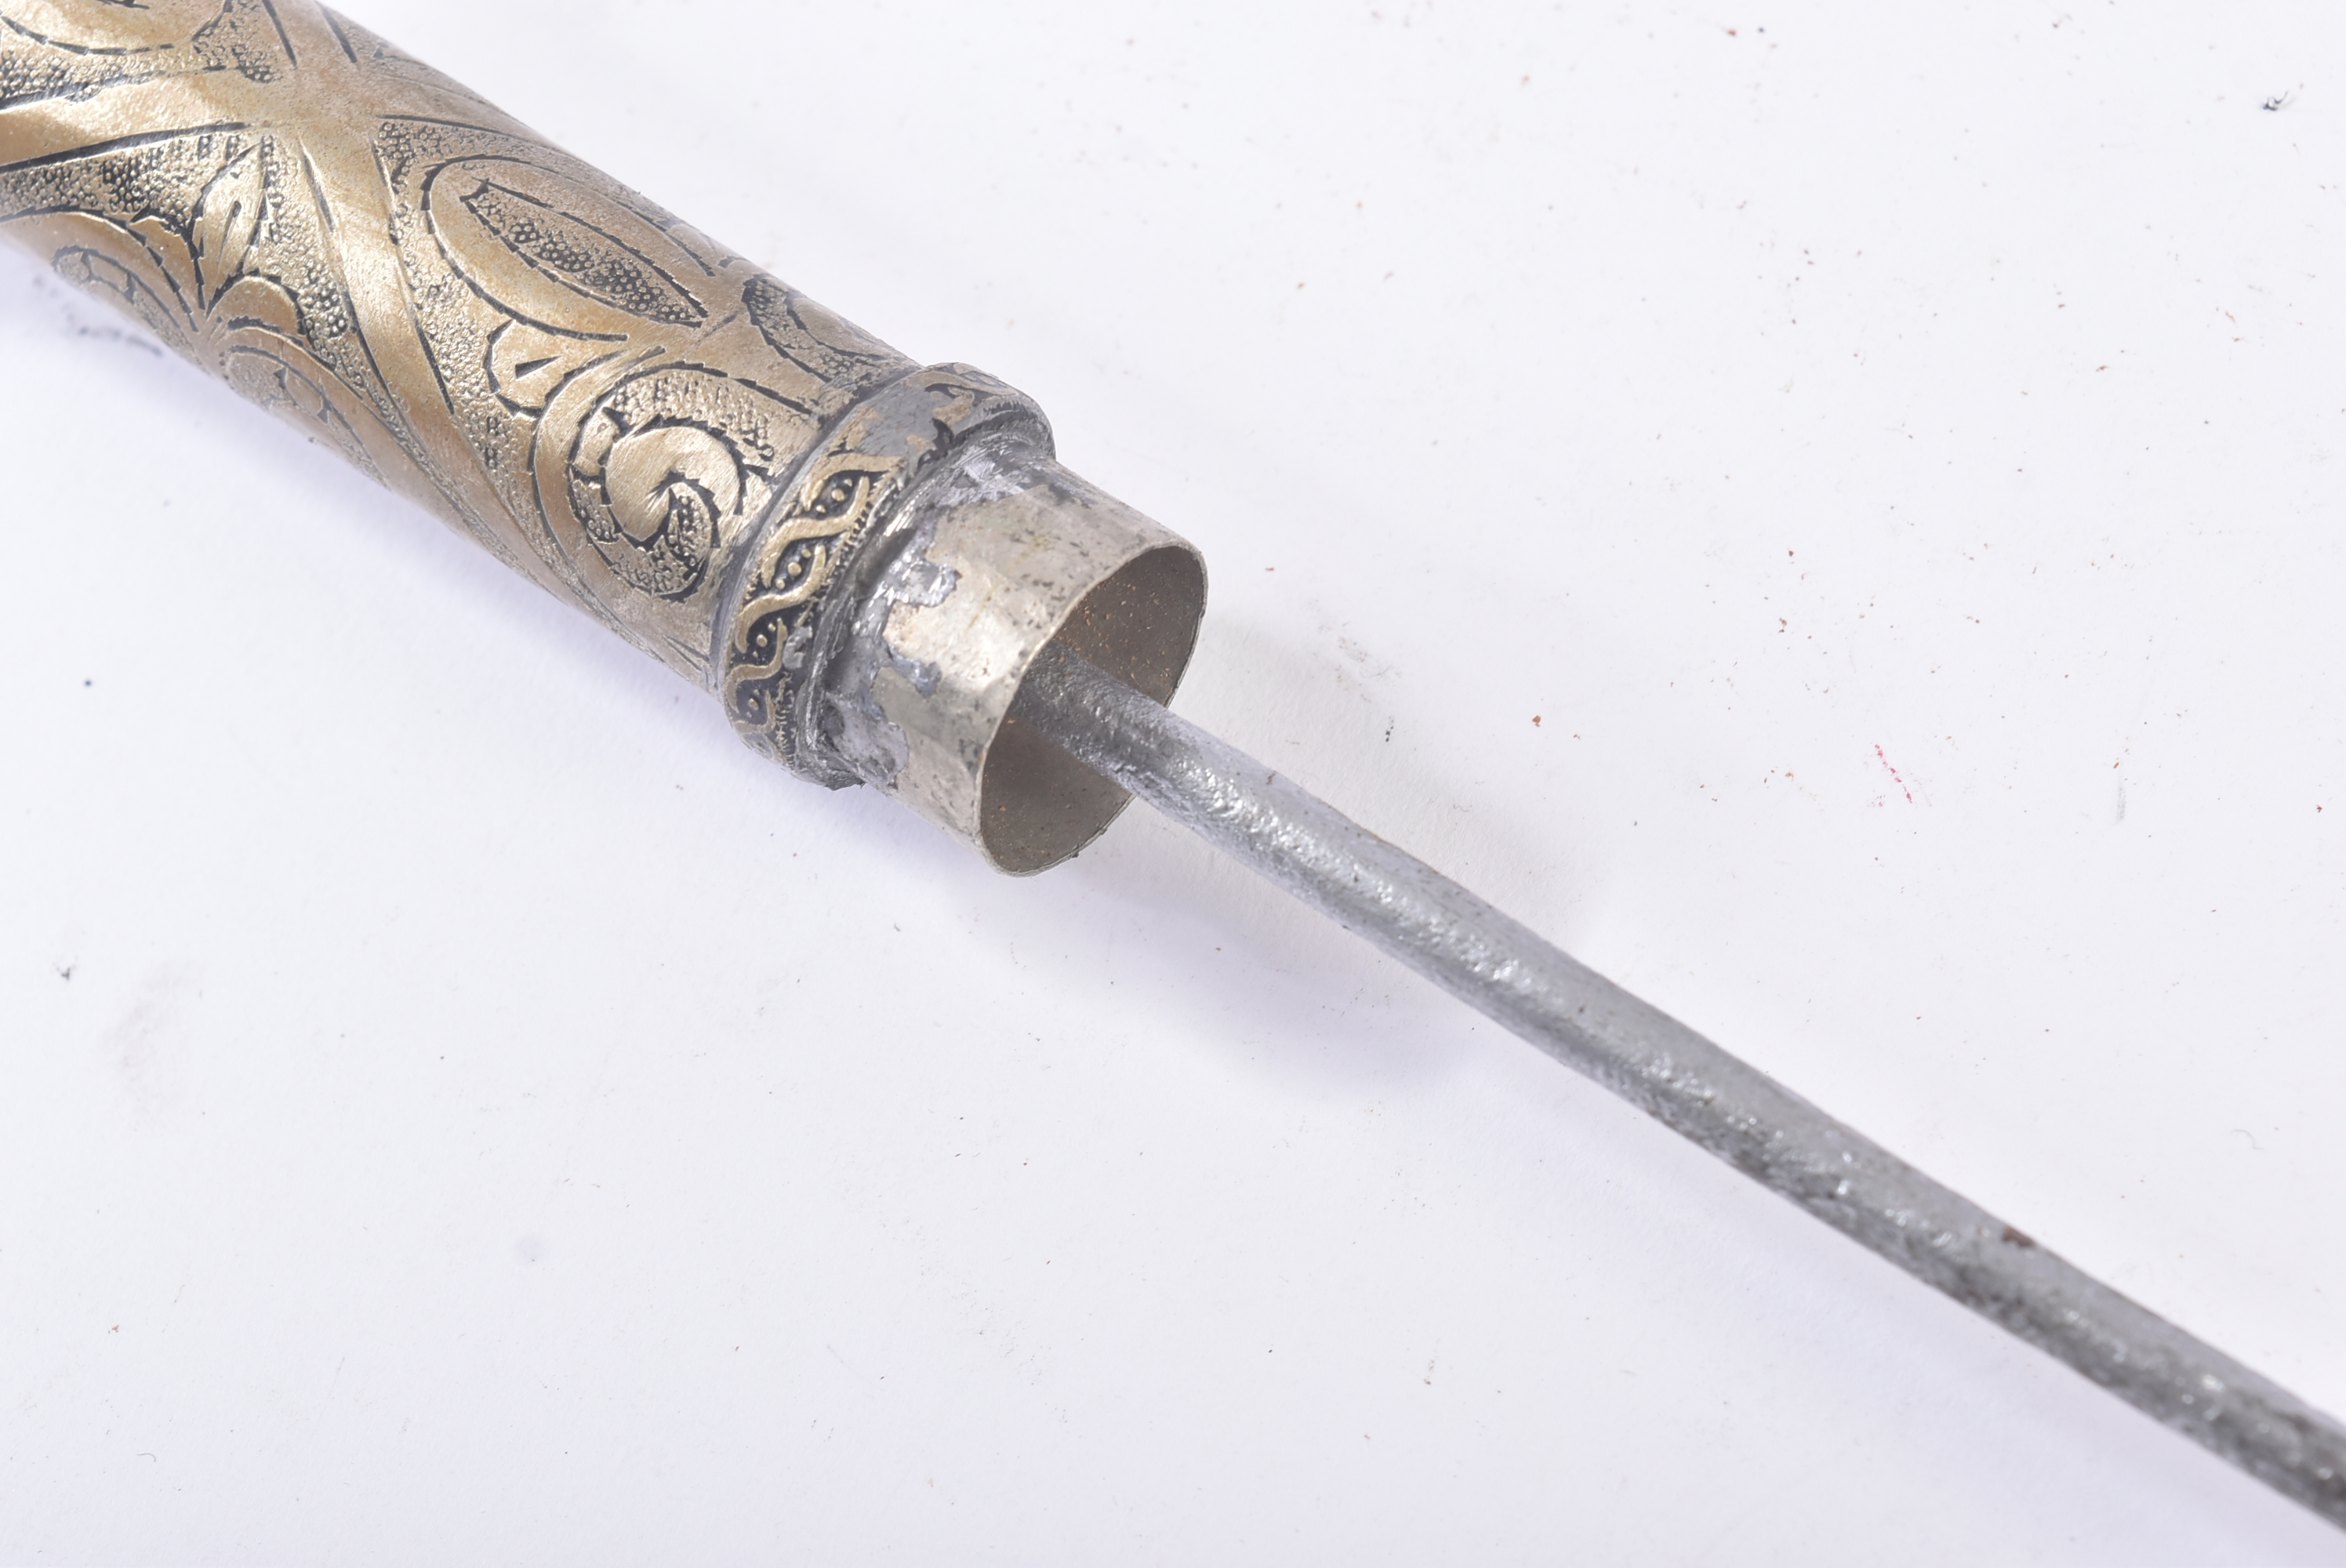 19TH CENTURY VICTORIAN GENTLEMANS SWORD STICK WITH CONCEALED BLADE - Image 5 of 6